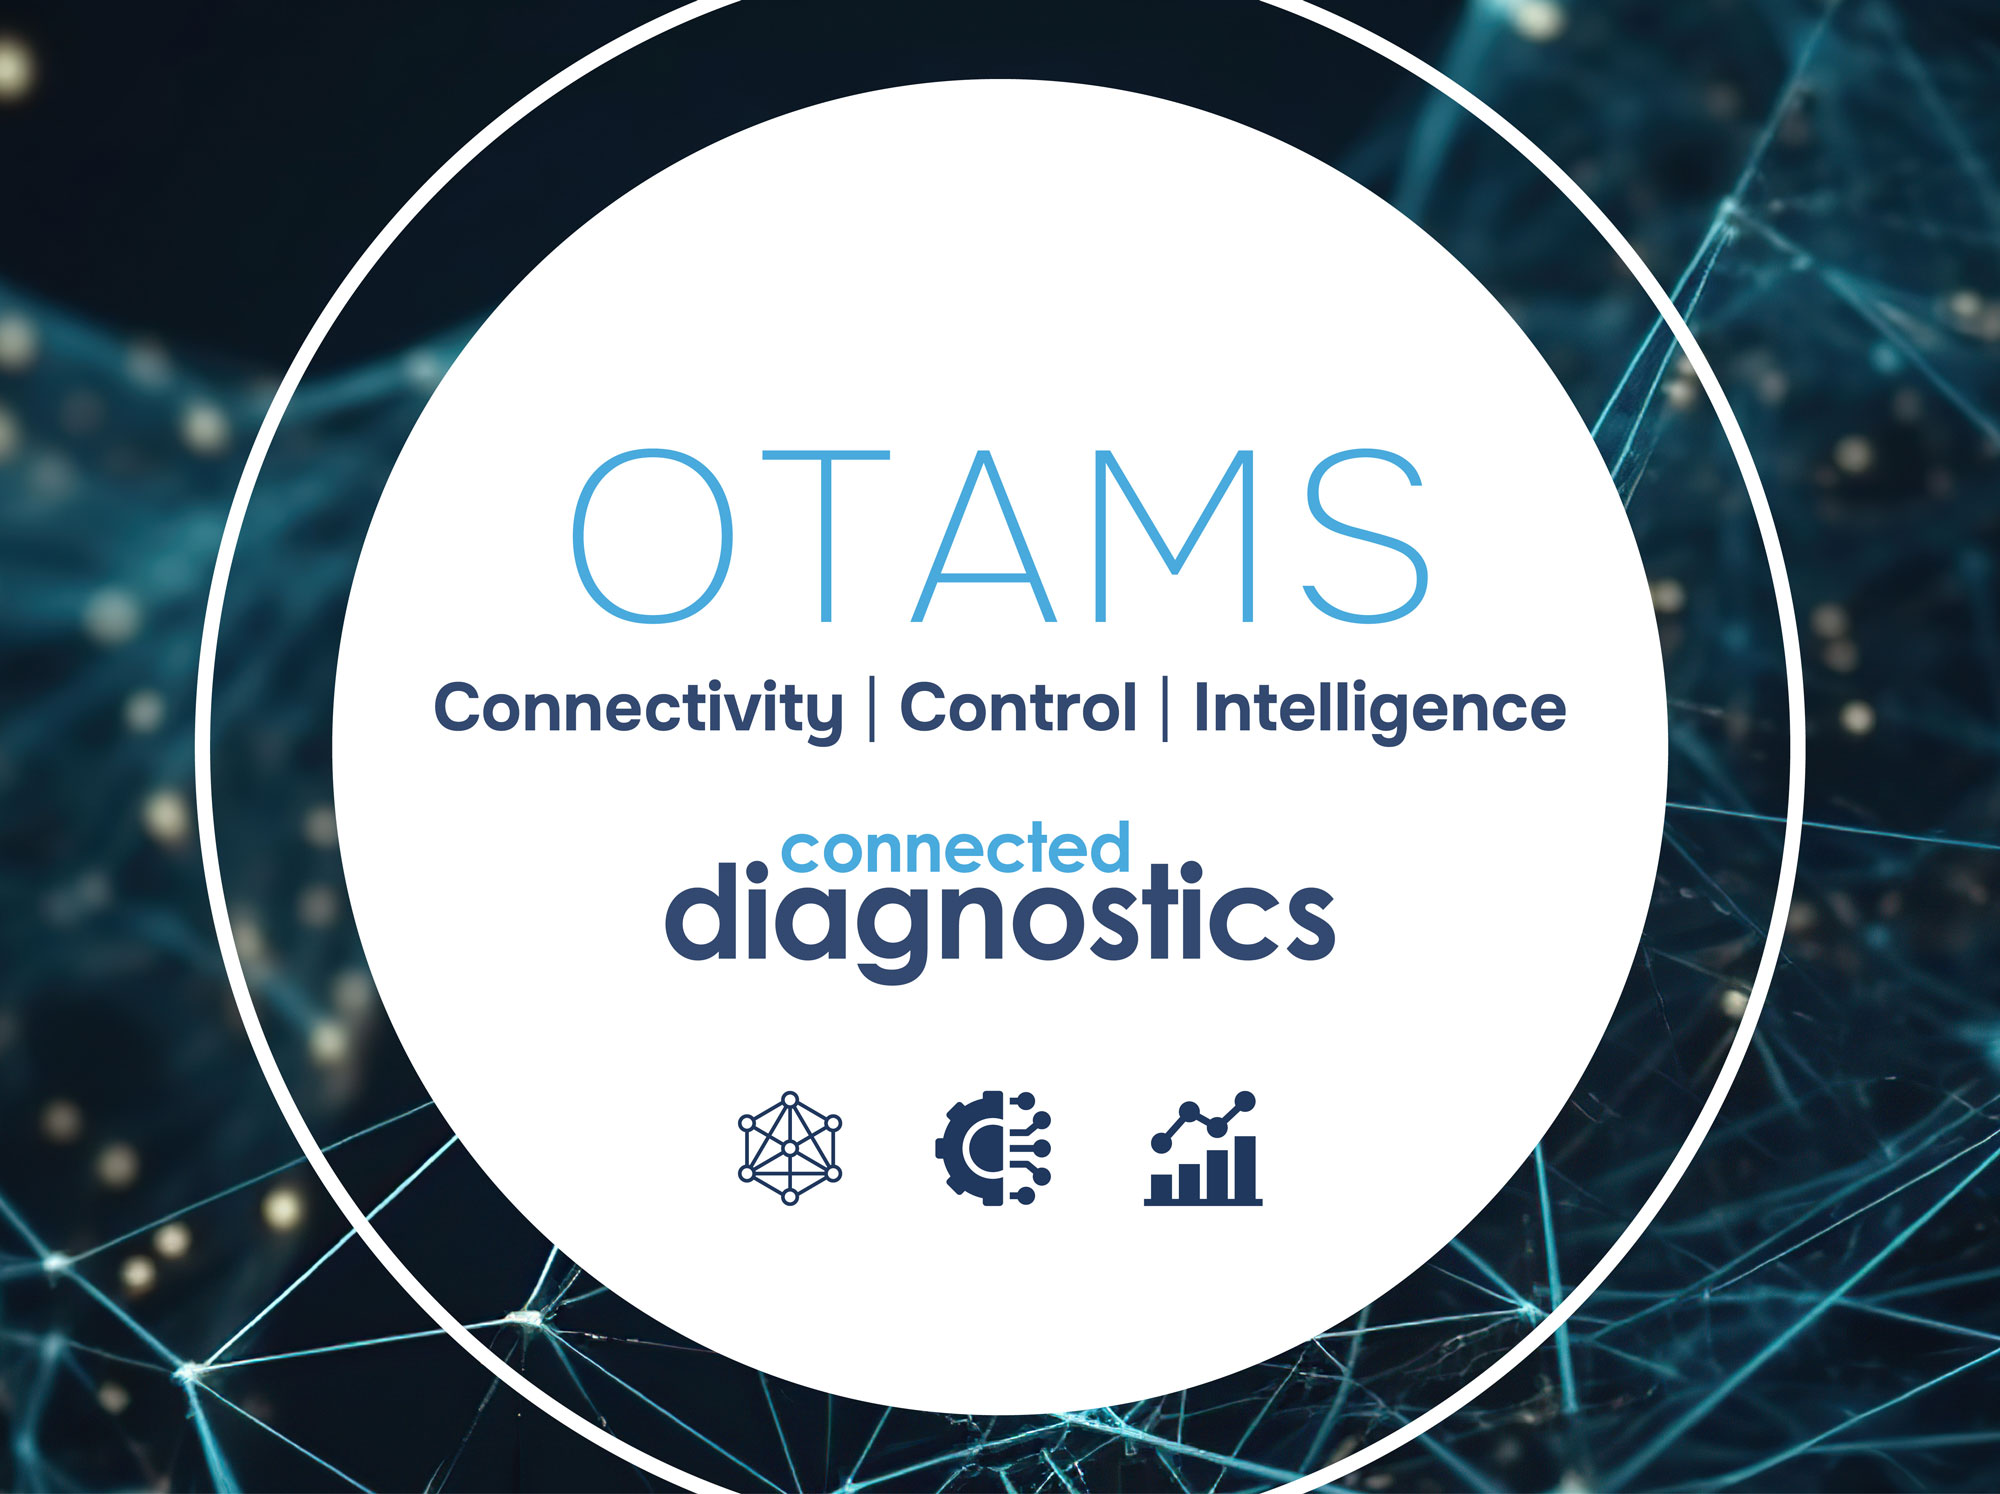 OTAMS is shown in a graphic circular image, with three icons to convey connectivity, control and intelligence.